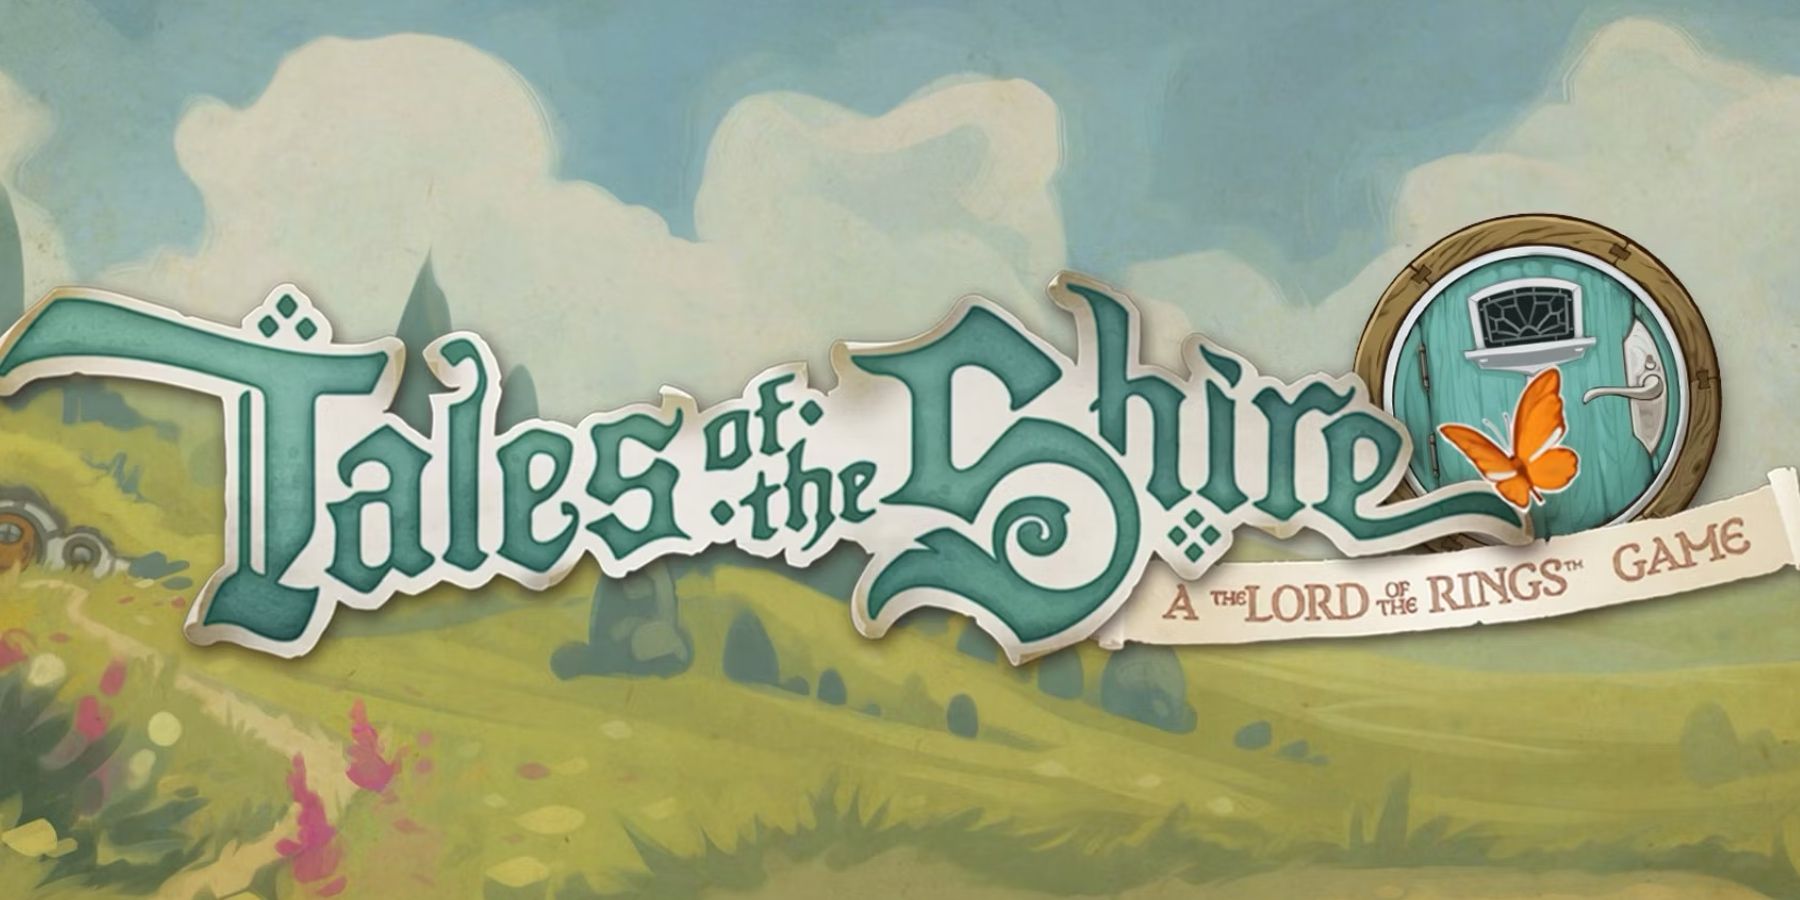 tales-of-the-shire-main-logo-field-background